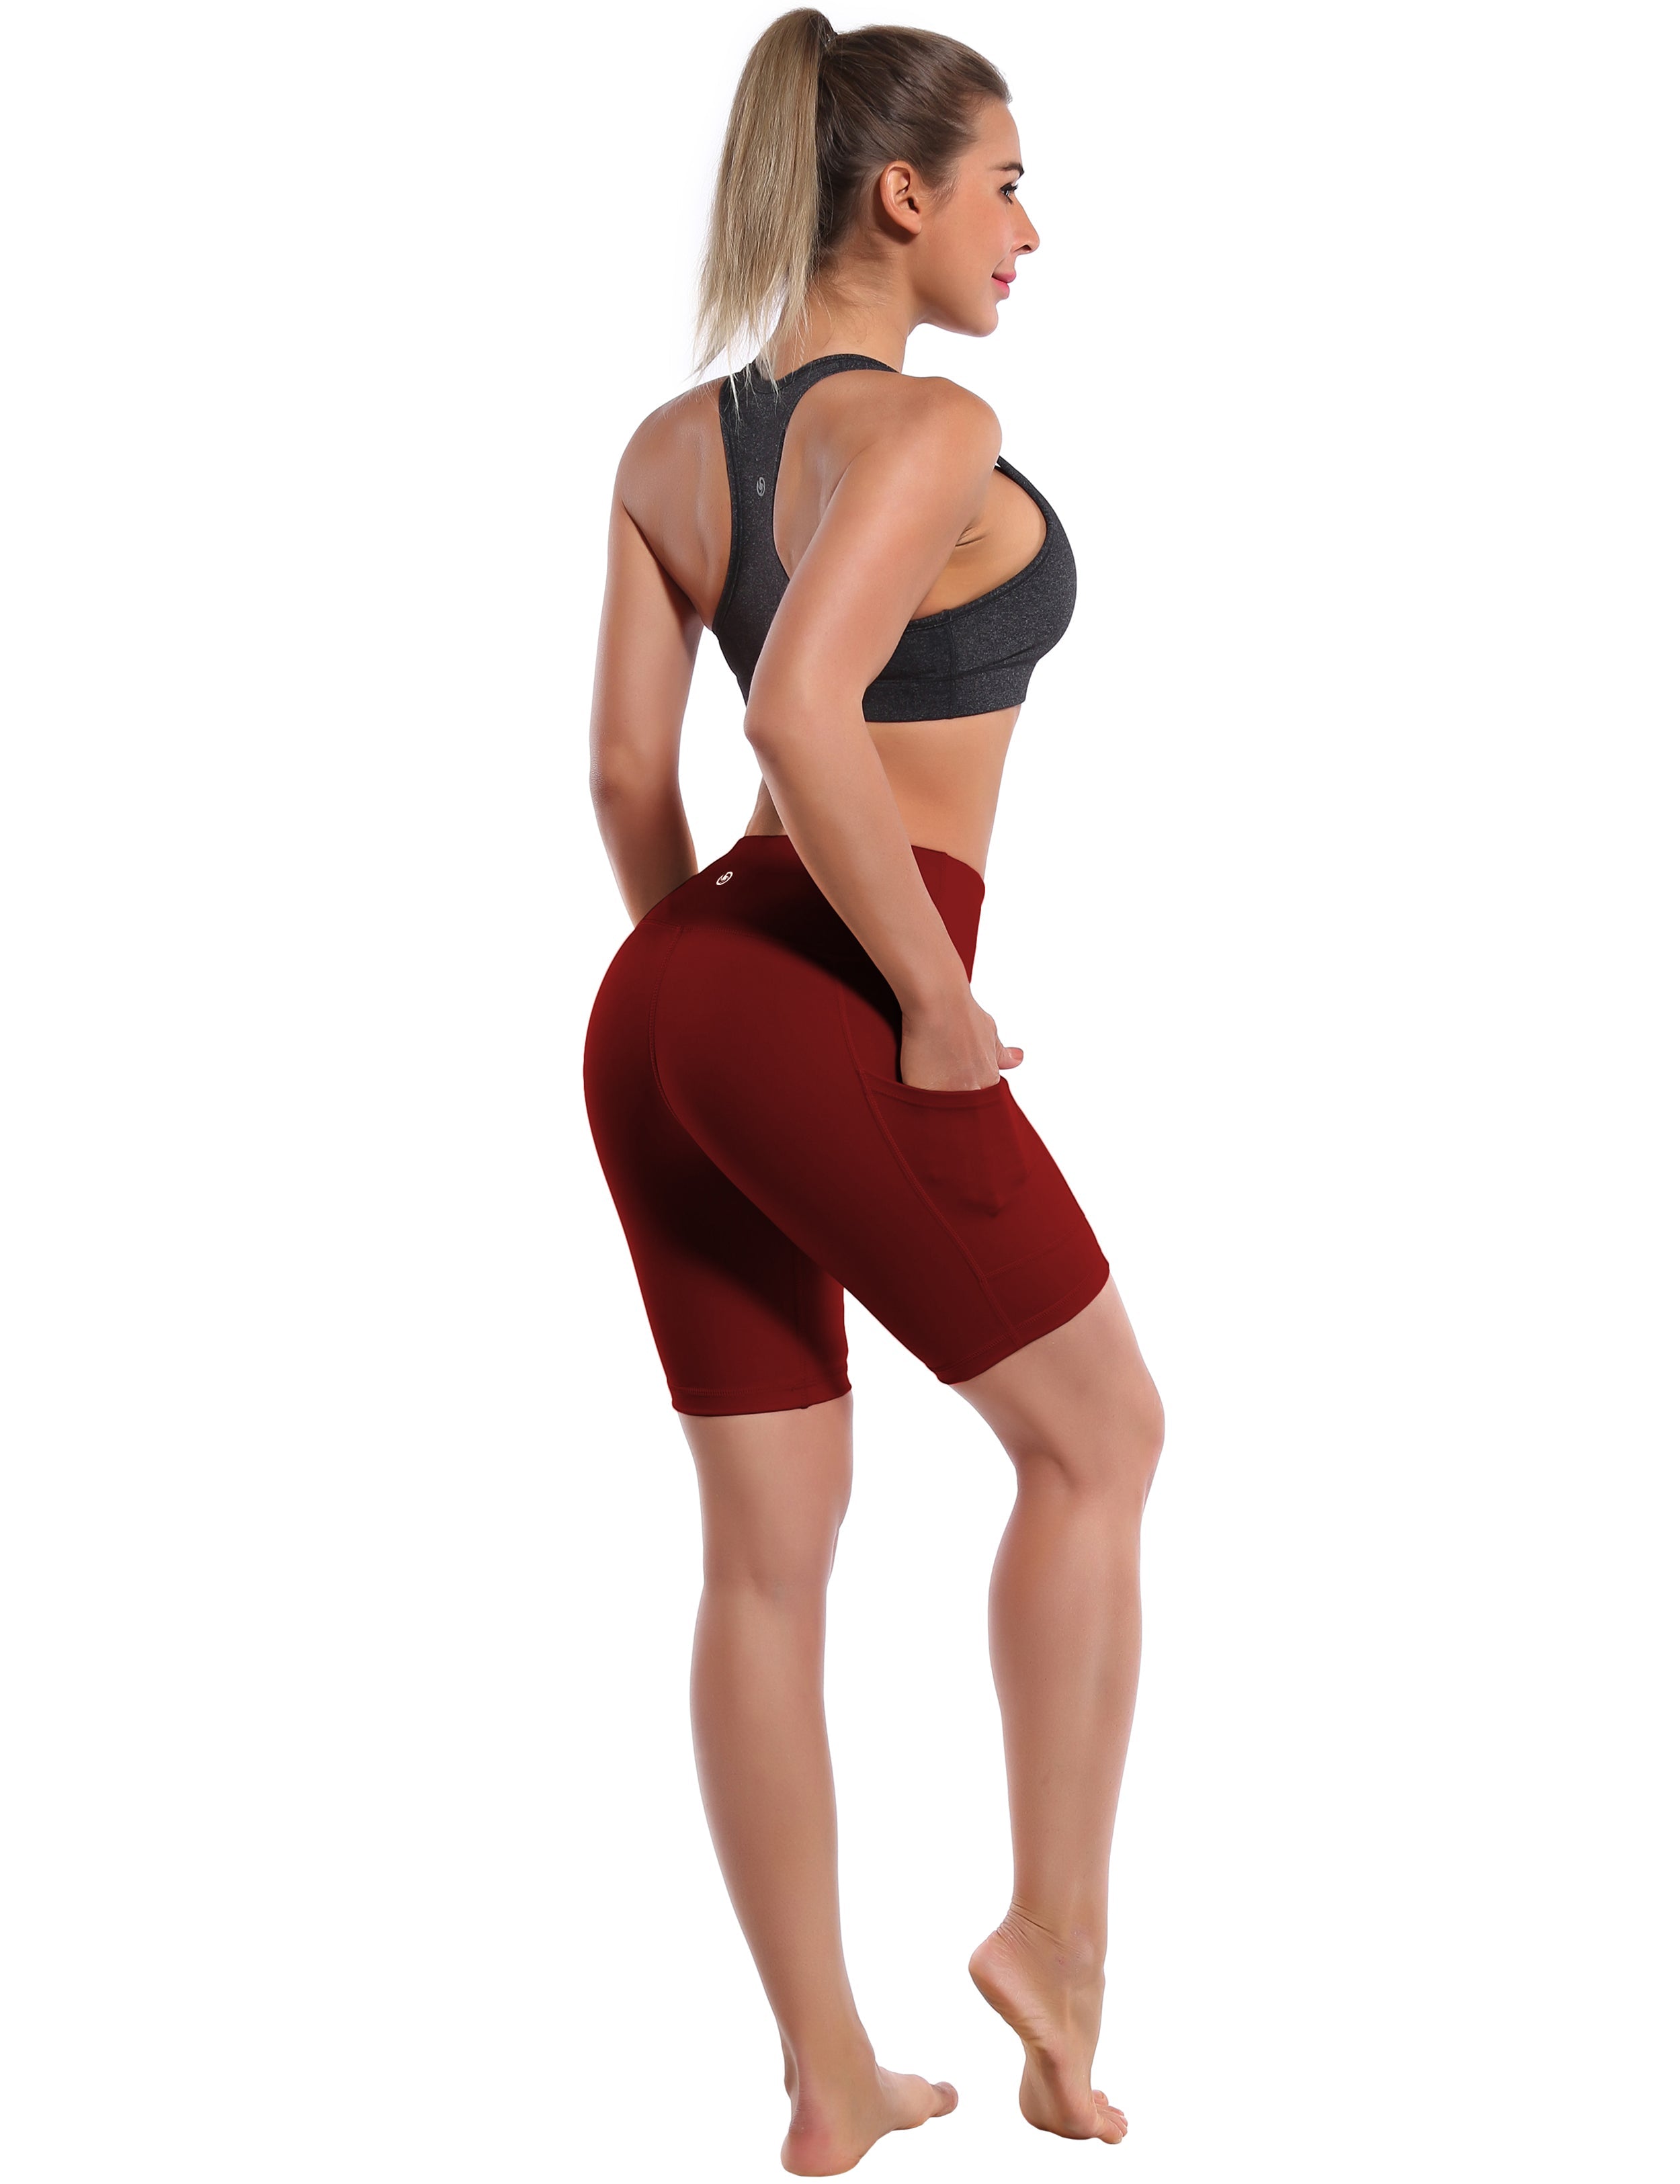 8" Side Pockets Biking Shorts cherryred Sleek, soft, smooth and totally comfortable: our newest style is here. Softest-ever fabric High elasticity High density 4-way stretch Fabric doesn't attract lint easily No see-through Moisture-wicking Machine wash 75% Nylon, 25% Spandex